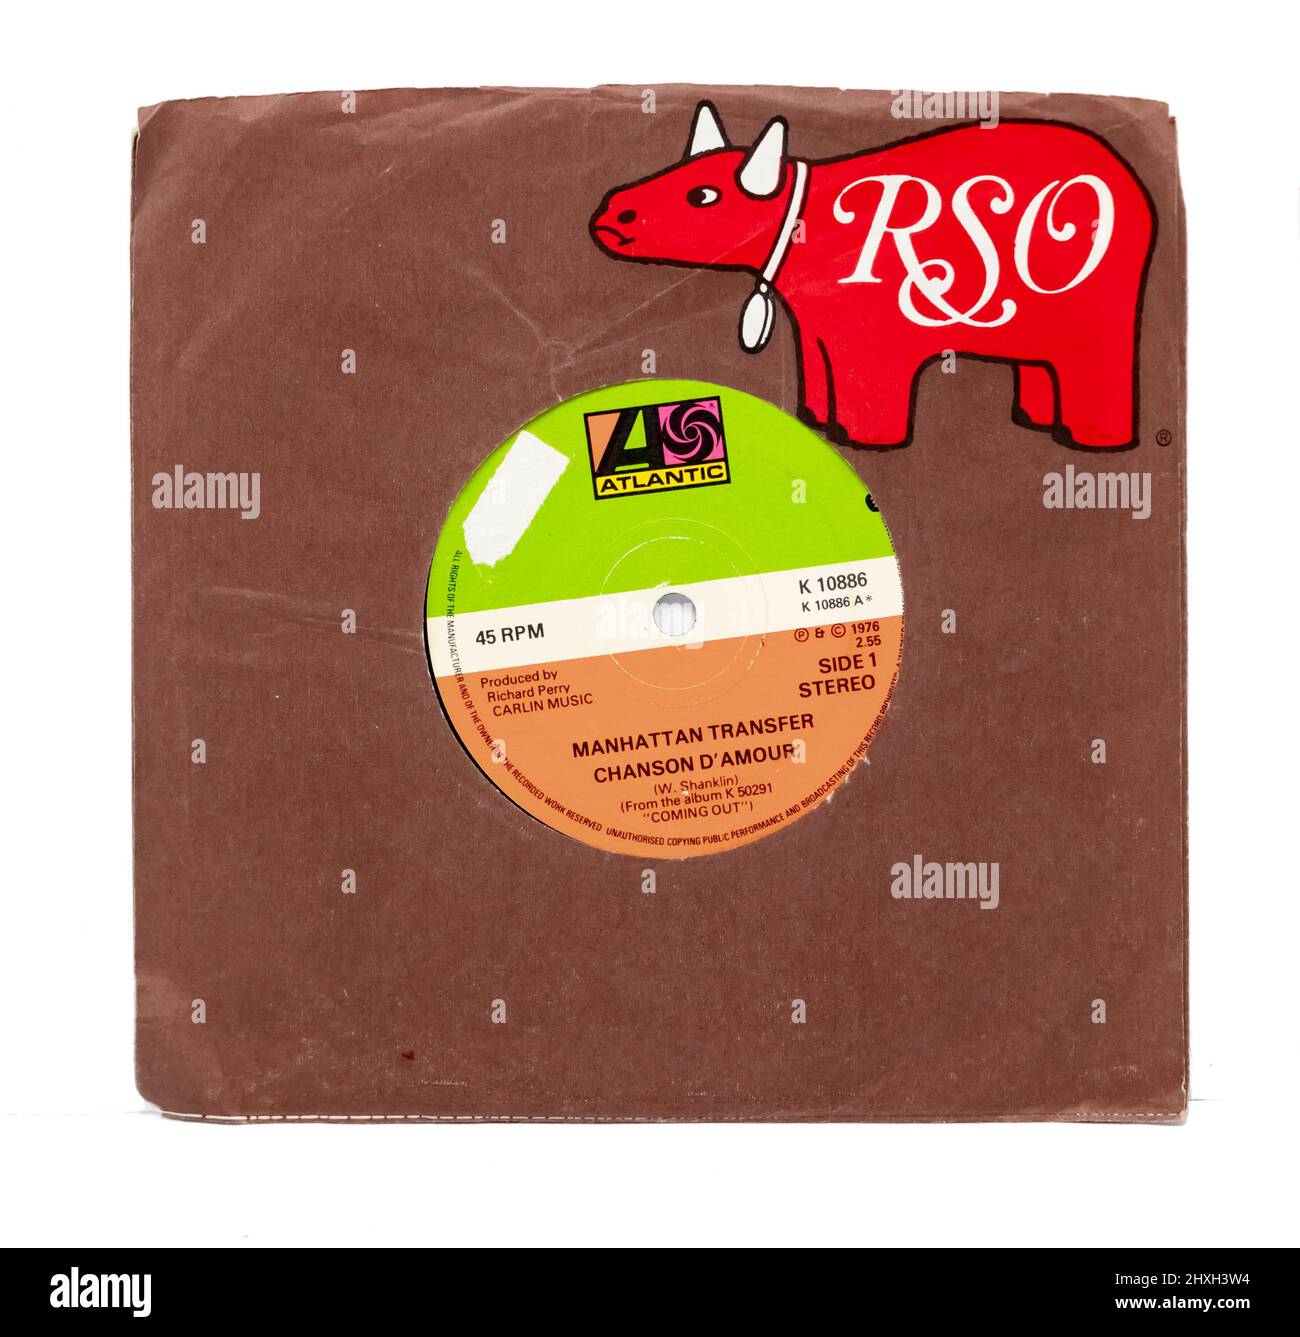 vinyl 45rpm single of chanson d'amour by Manhattan transfer in paper sleeve with RSO record label logo from 1976 Stock Photo